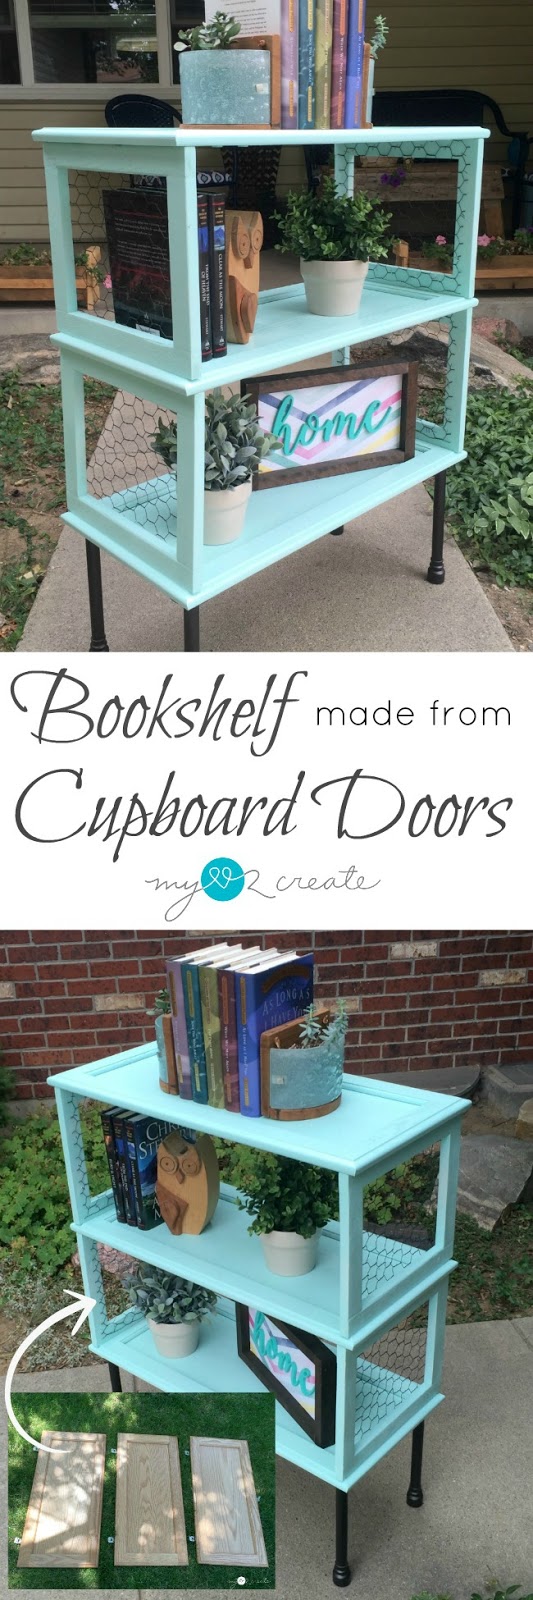 Make a beautiful and unique Bookshelf from Cupboard Doors, the perfect repurposed project for your home.  Follow this picture tutorial to learn how at MyLove2Create.